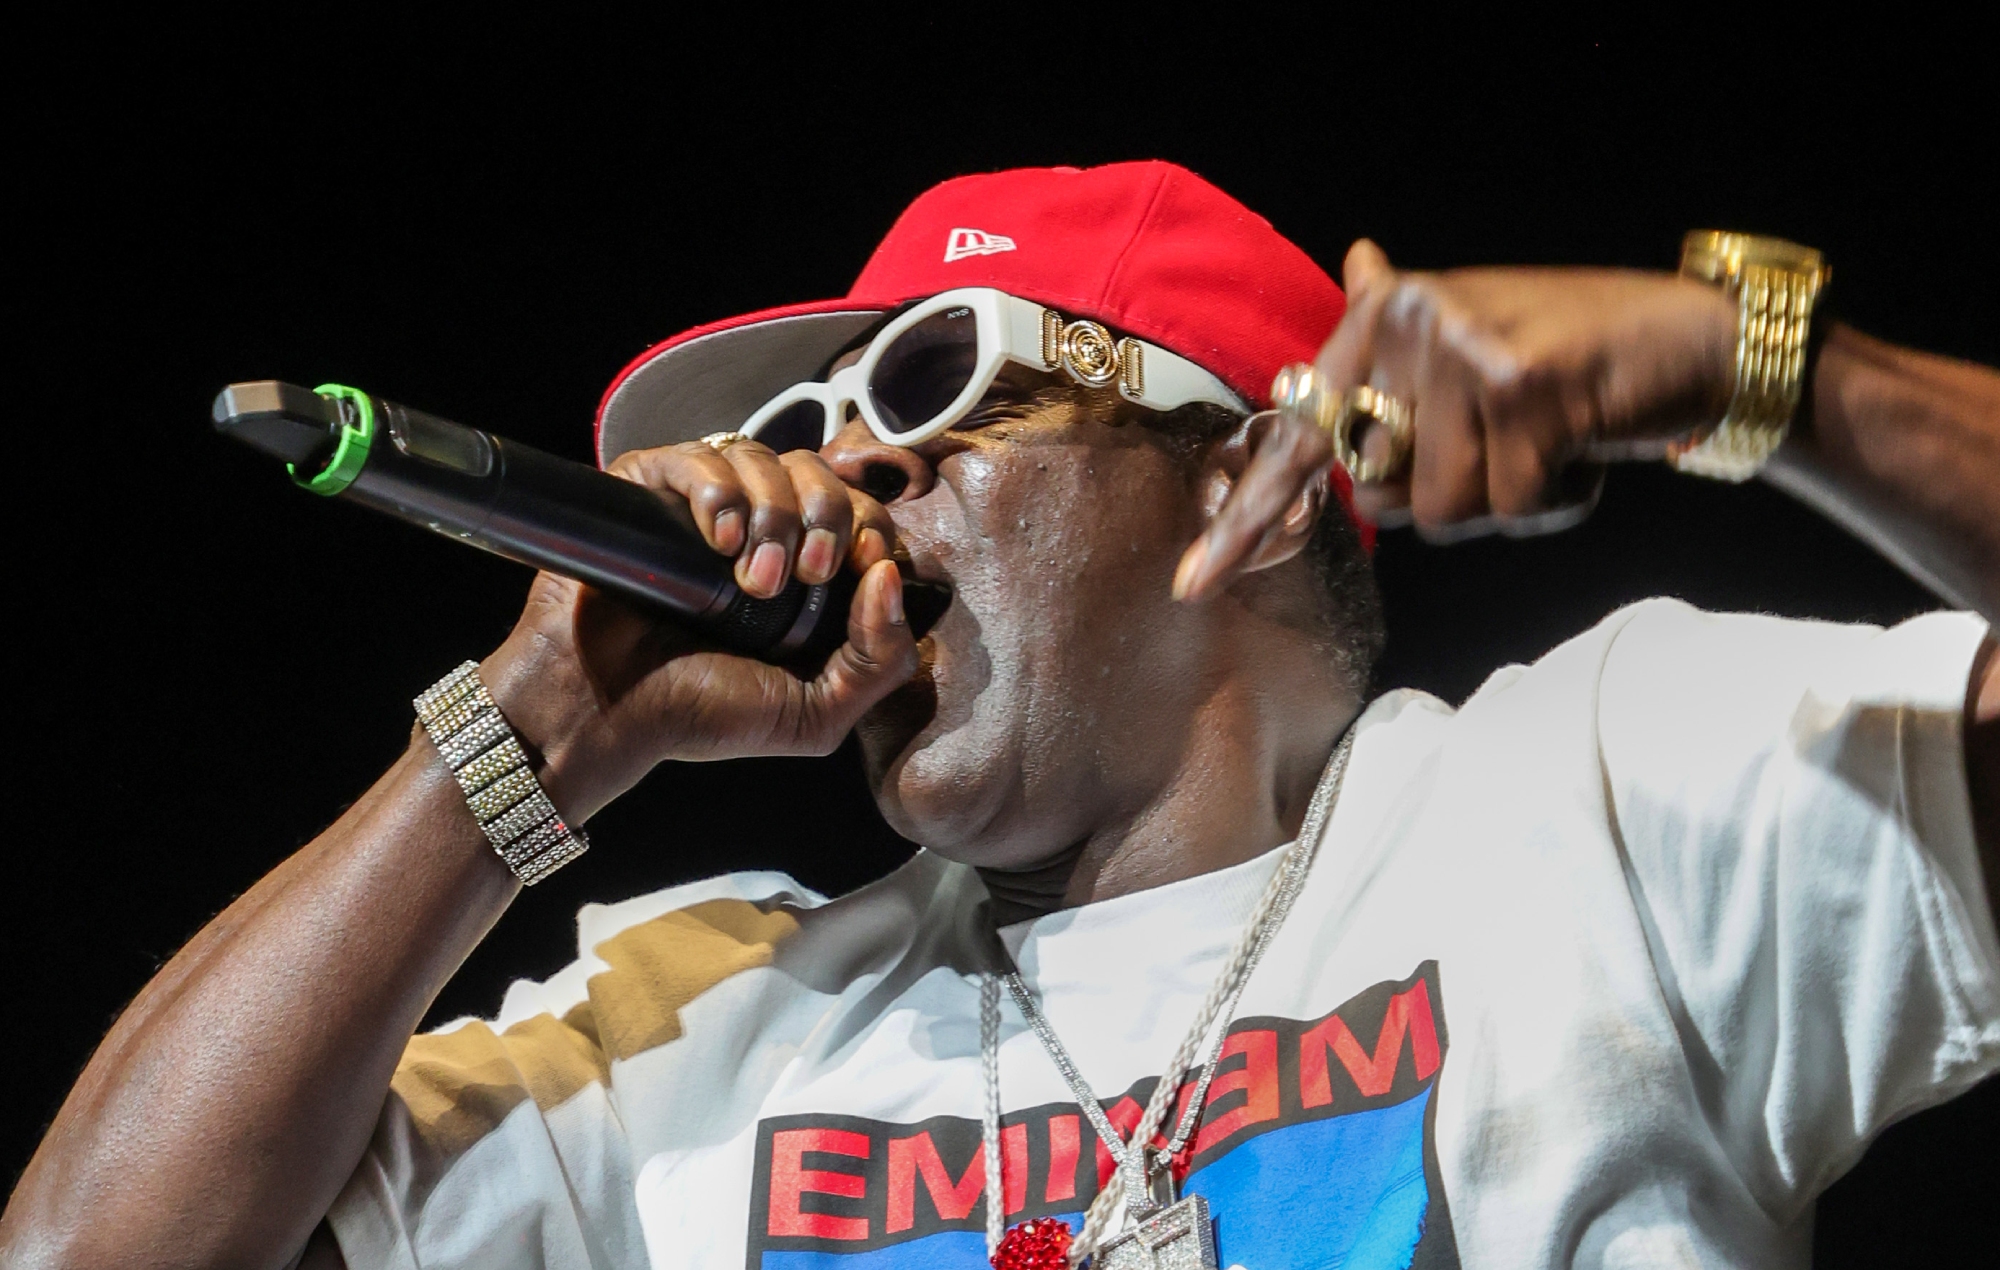 Watch Flavor Flav’s enthusiastic rendition of the National Anthem at NBA game